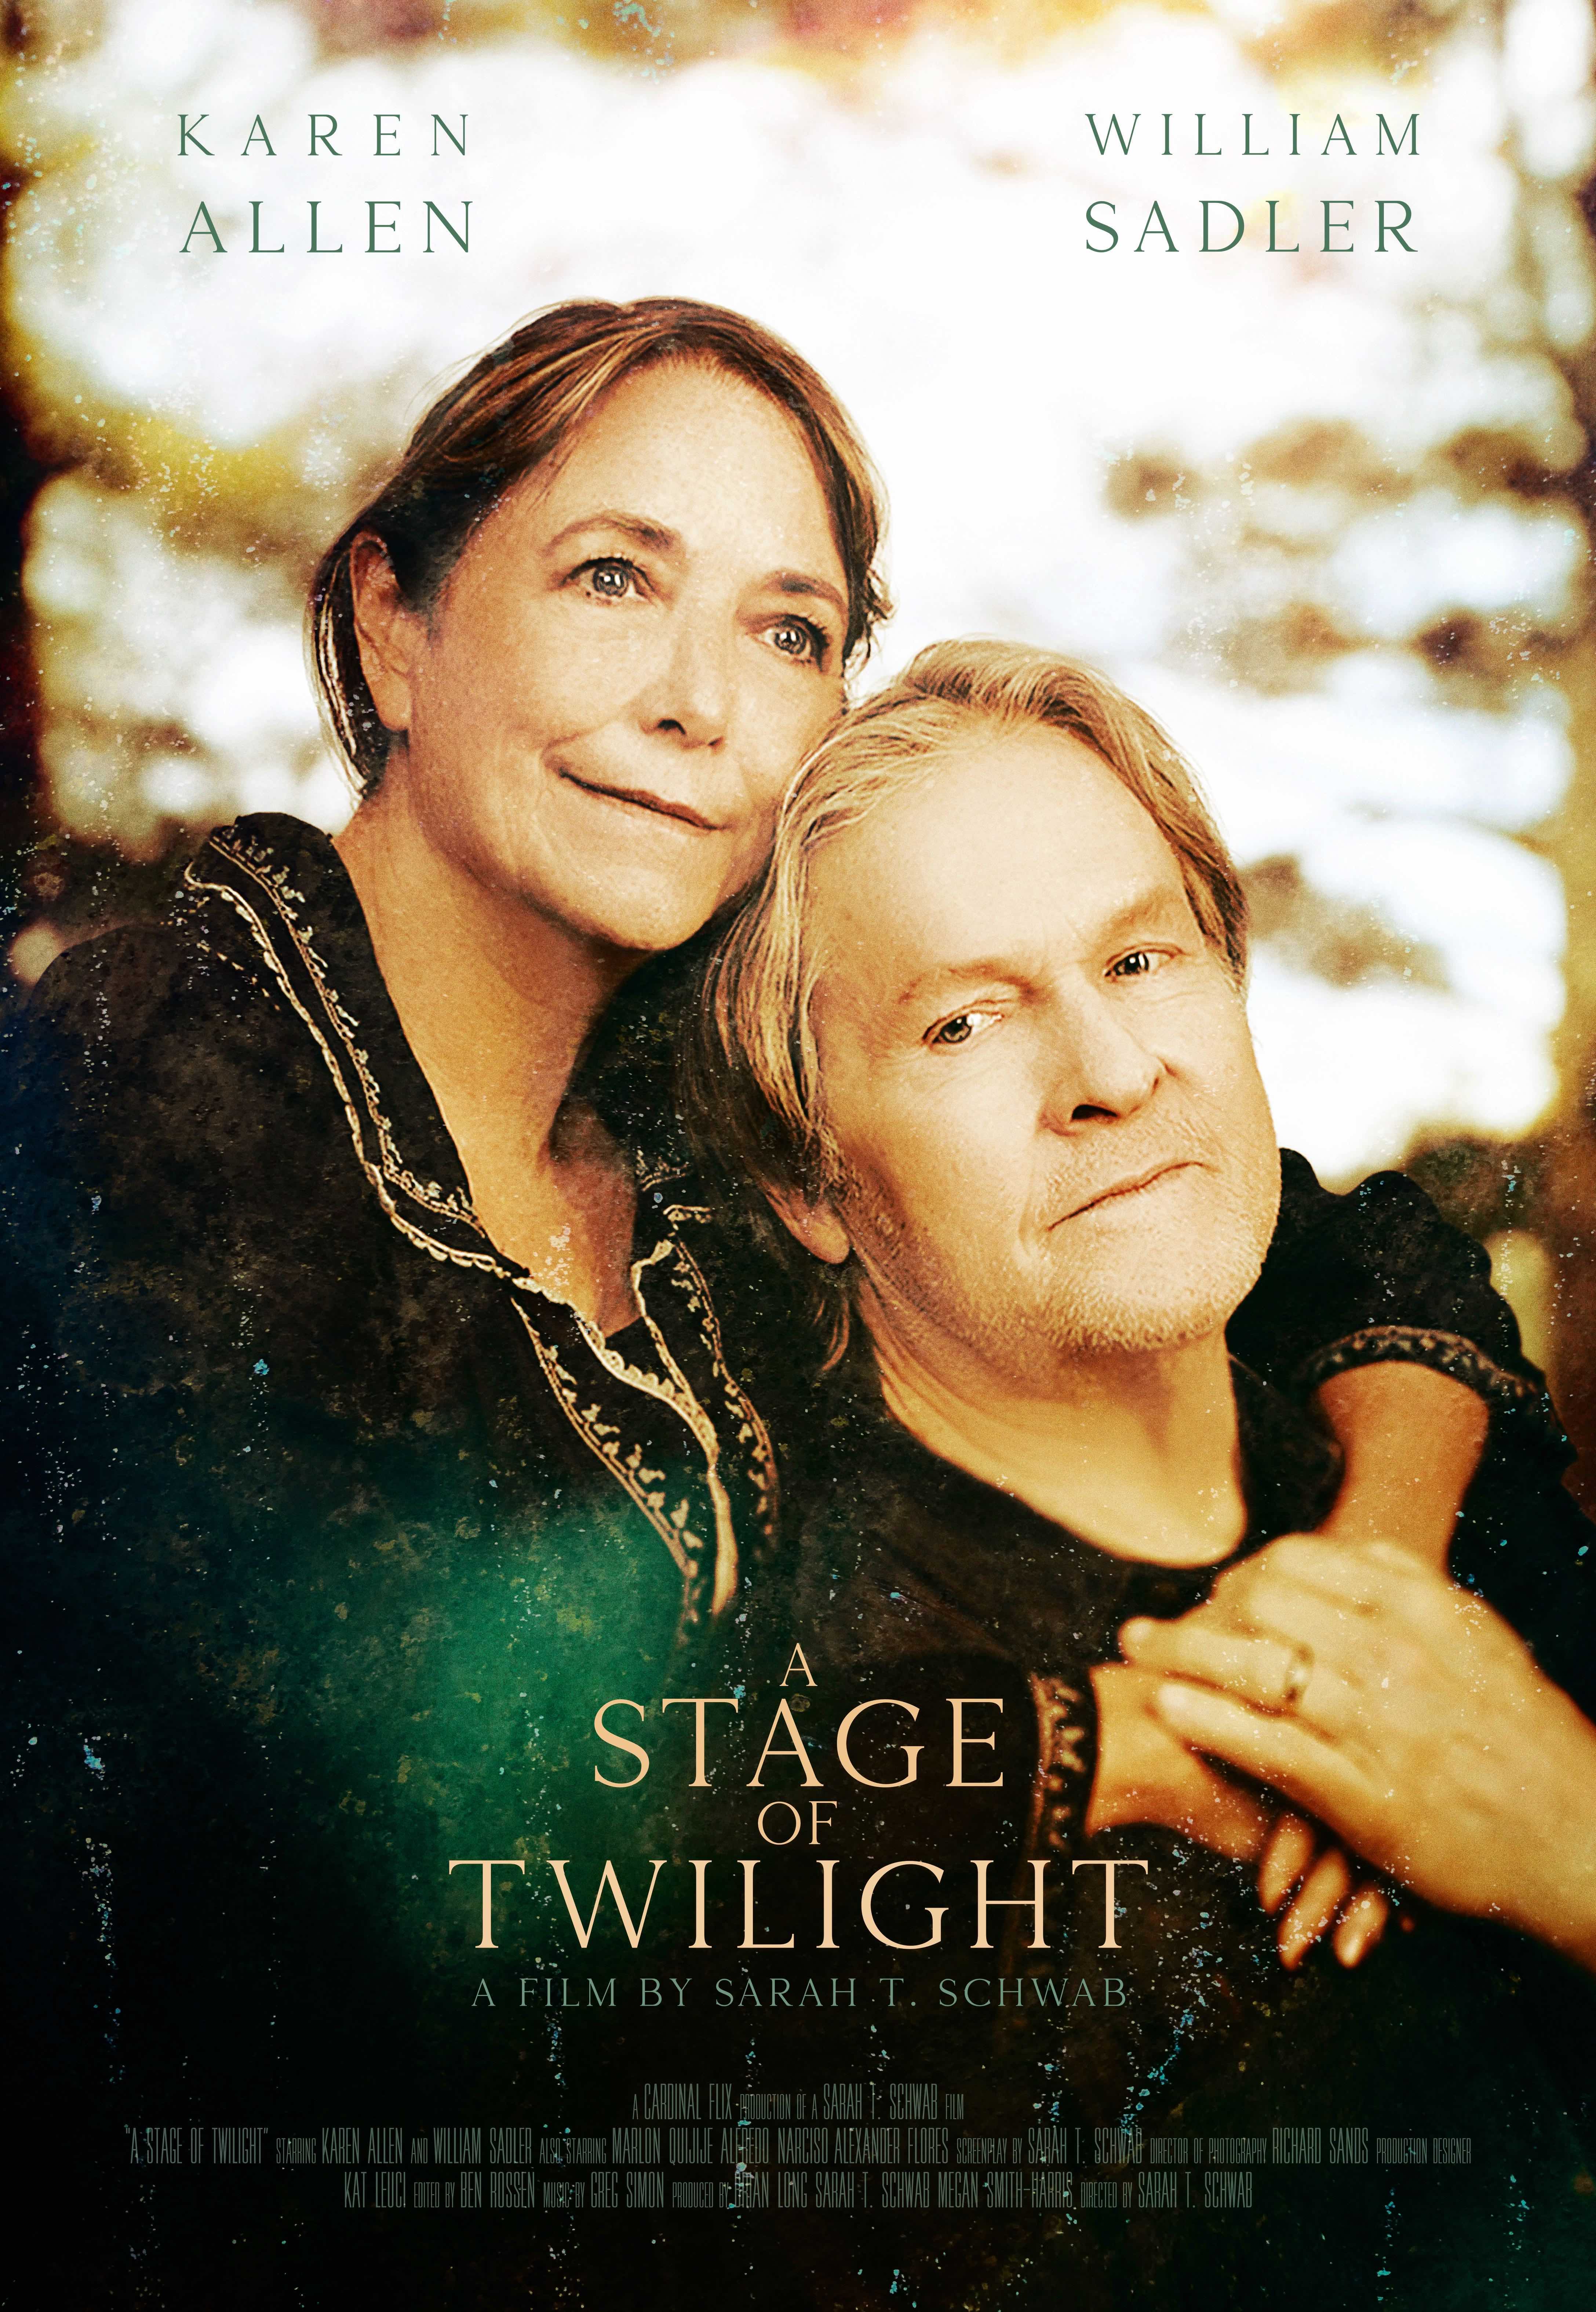 STAGE OF TWLIGHT will make its world premiere at the Woods Hole Film Festival in Woods Hole, MA on August 6 at 7:30 p.m.